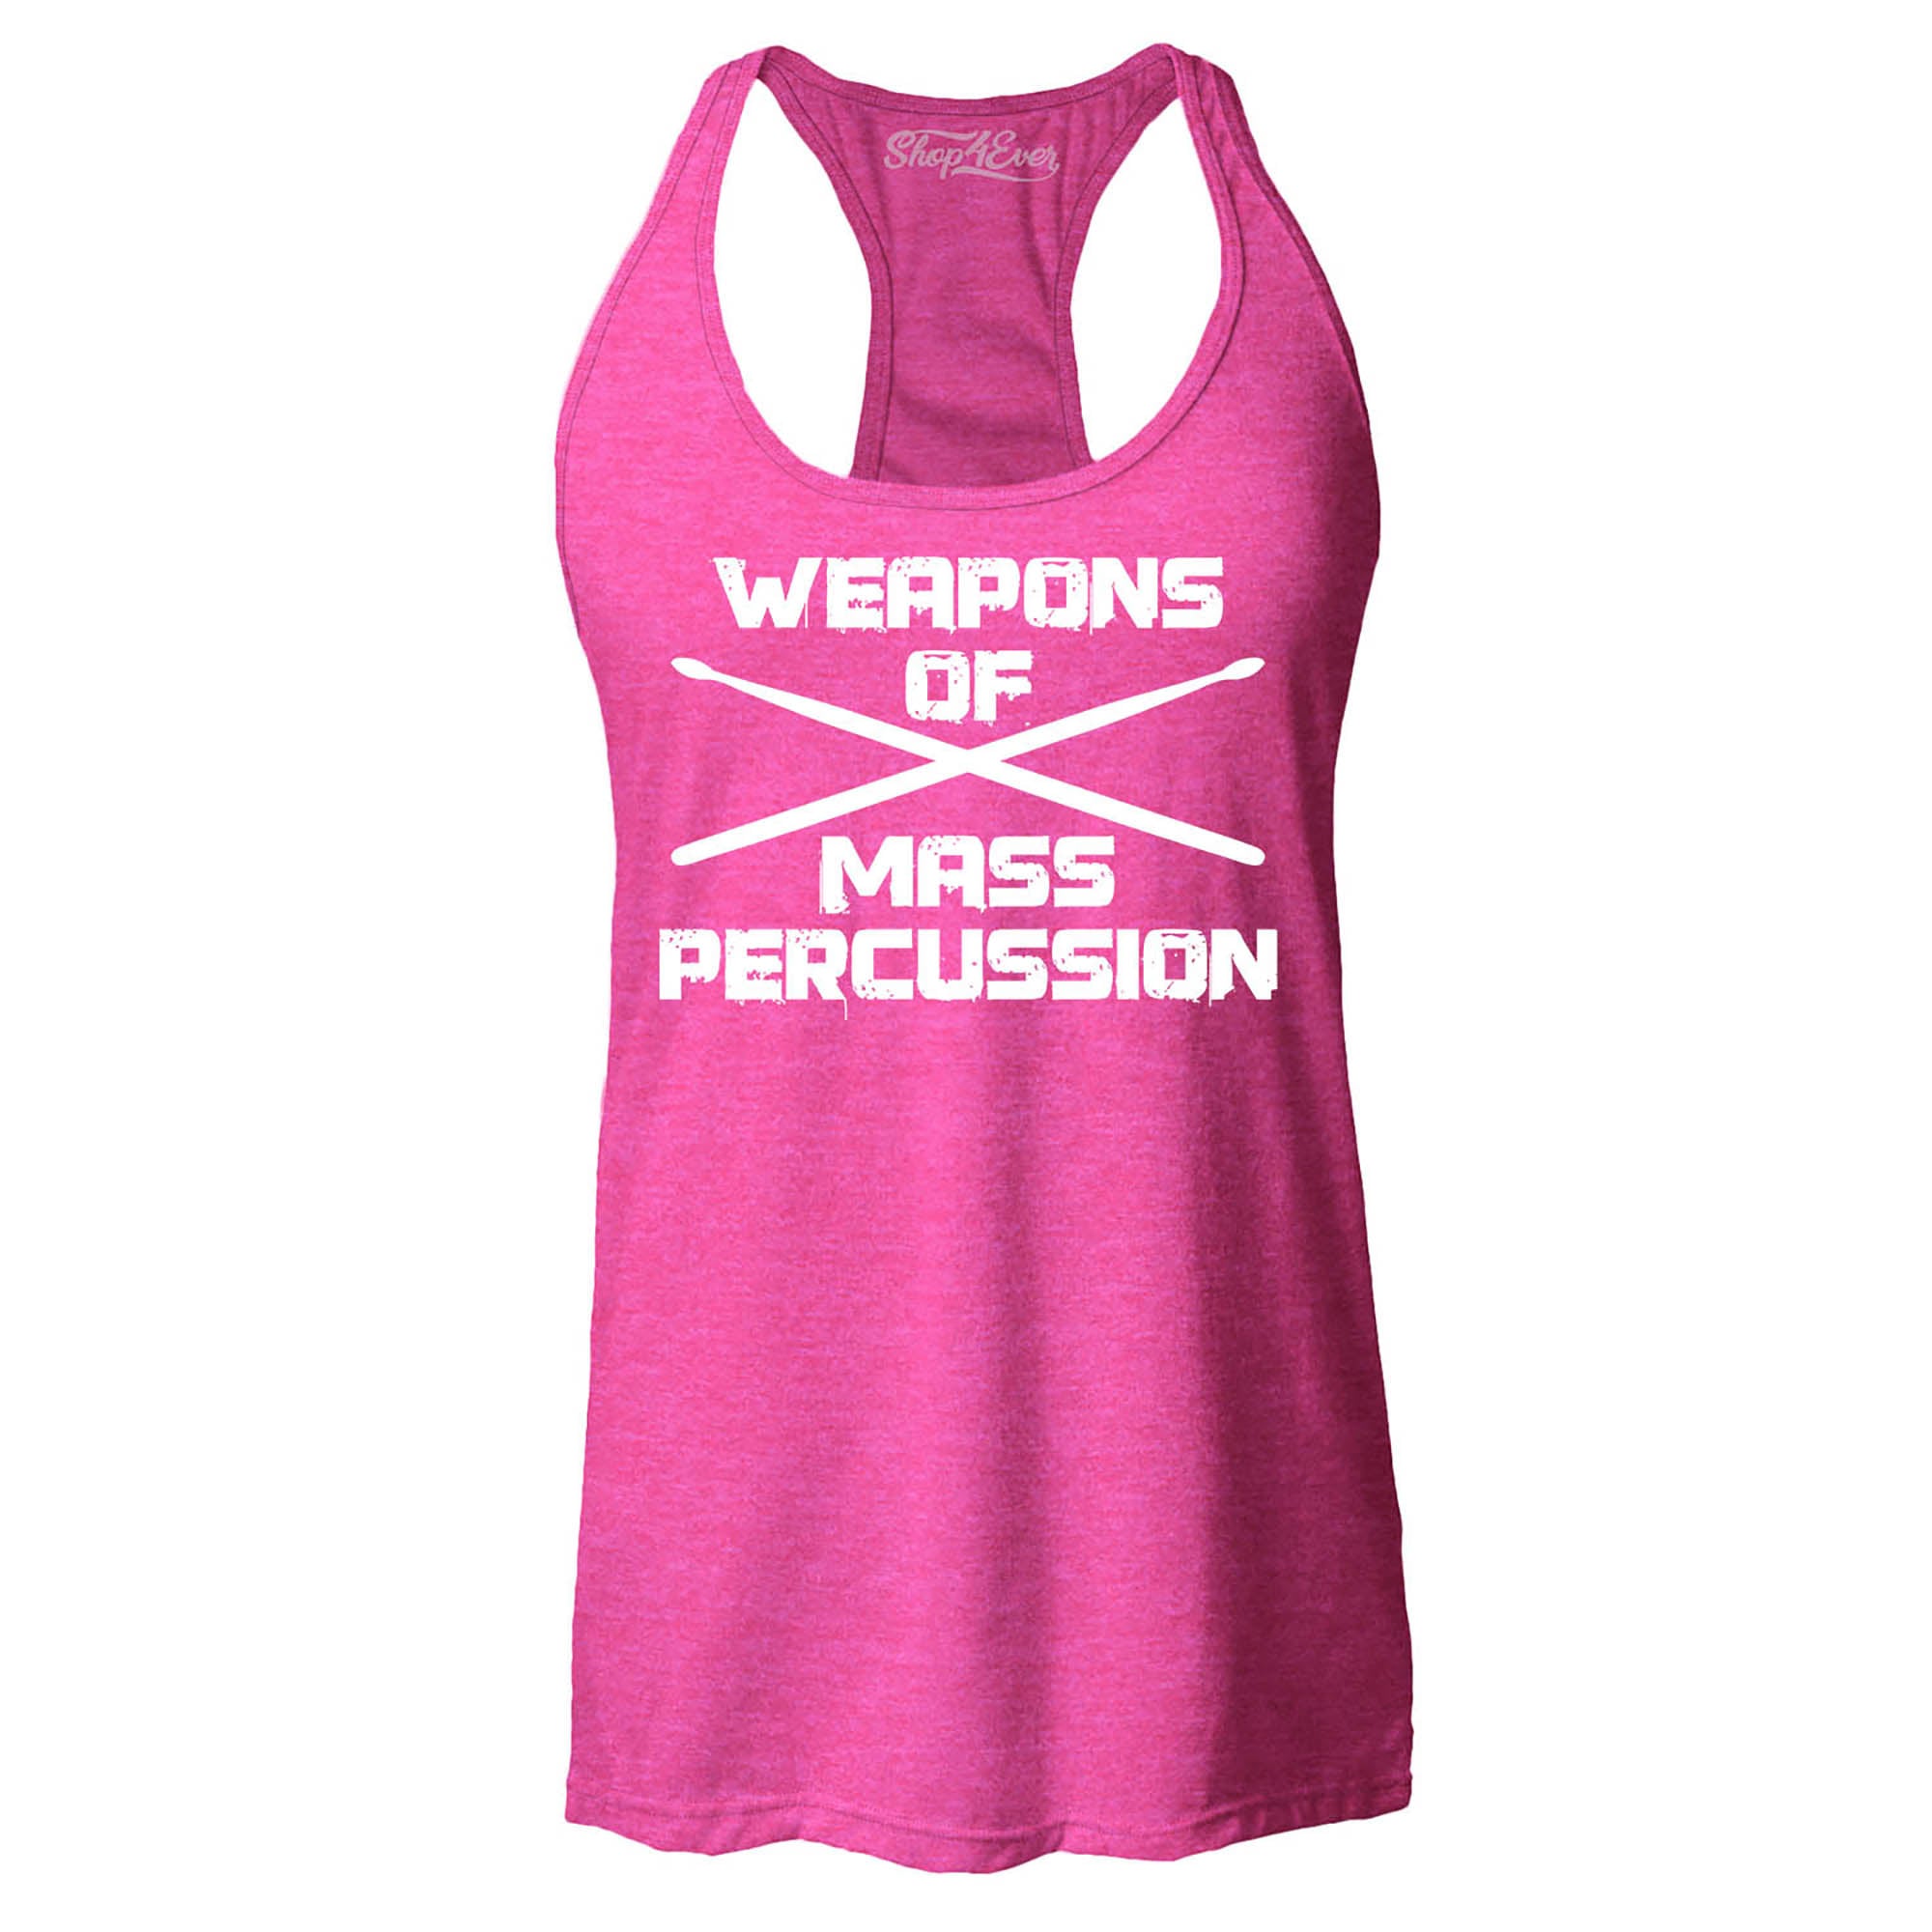 Weapons of Mass Percussion Drumsticks Drummer Women's Racerback Tank Top Slim Fit